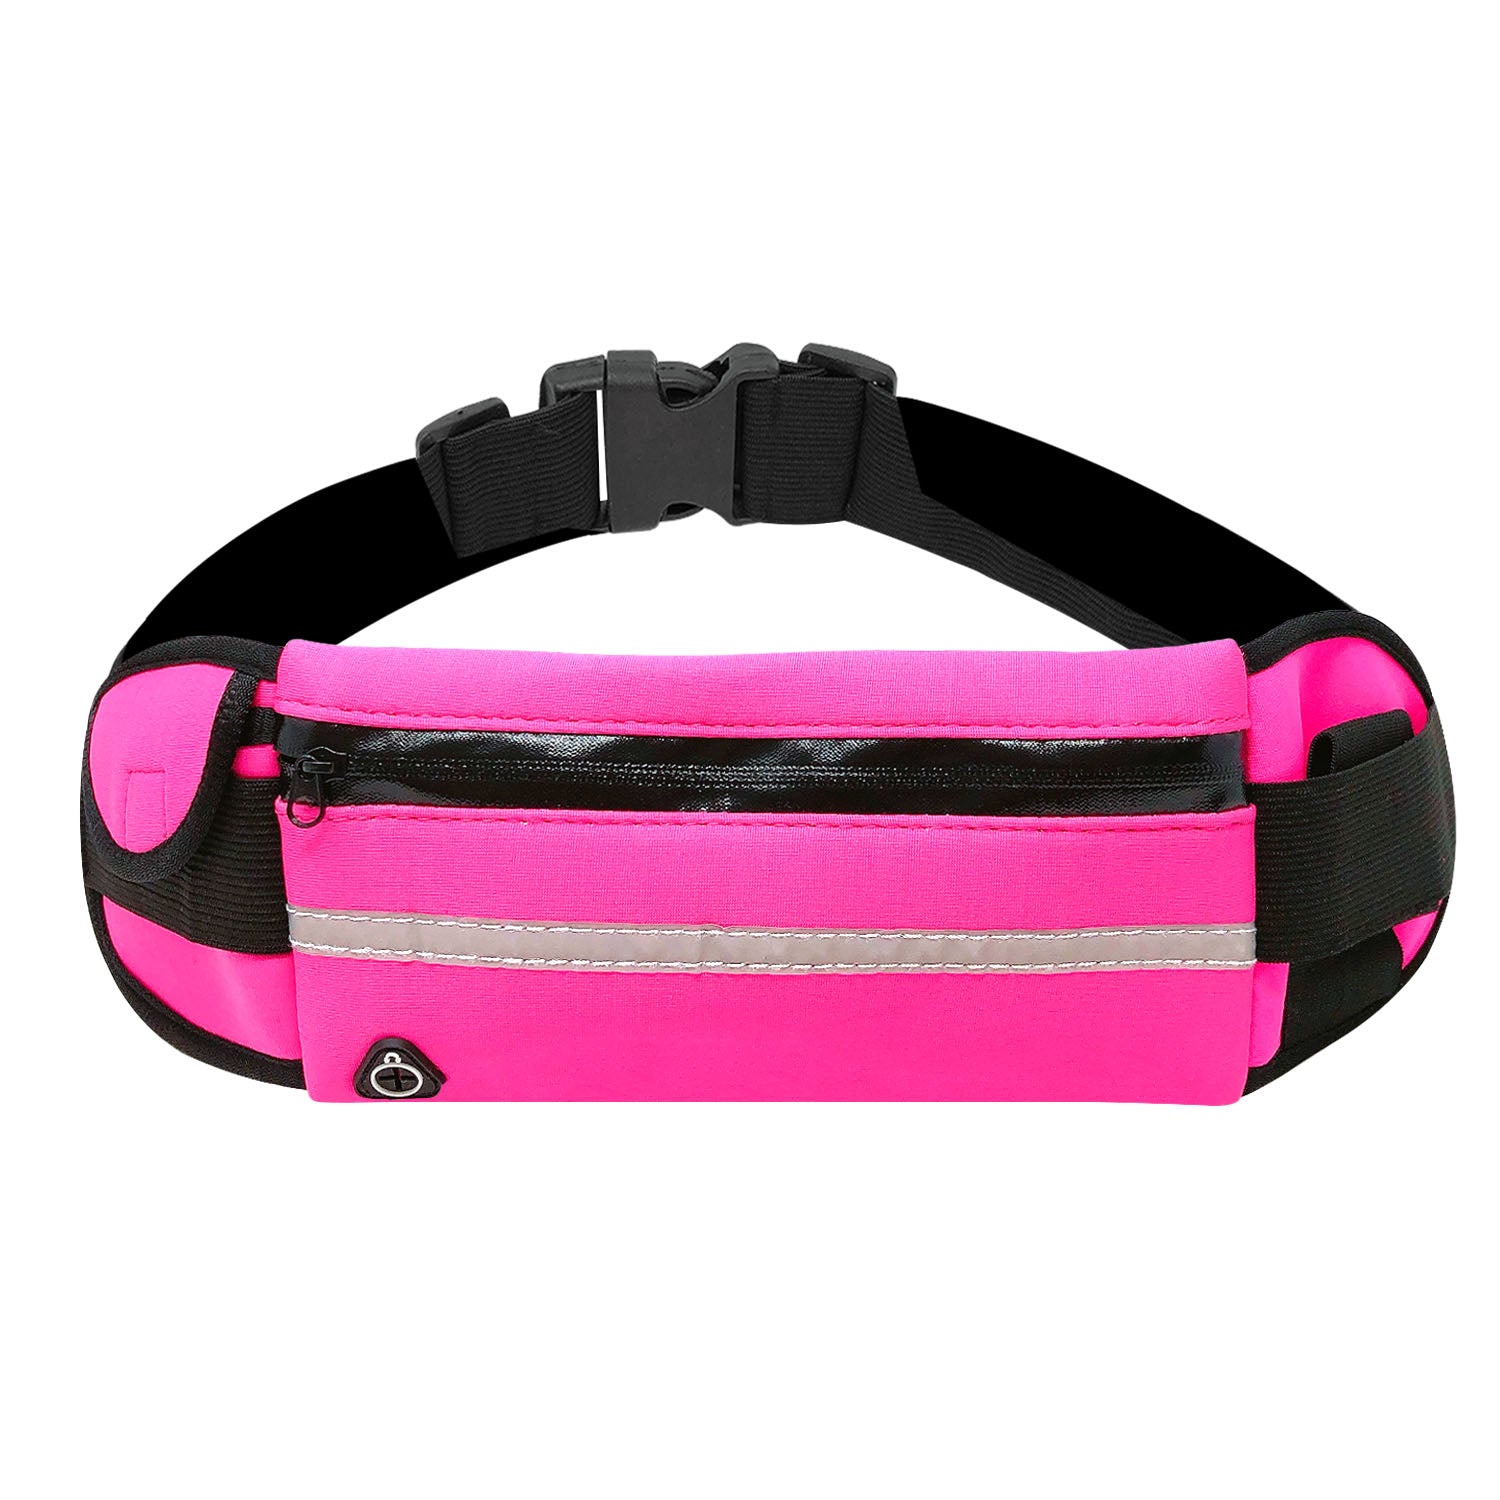 Wrapables Adjustable Neoprene Running Belt, Waterproof Fanny Pack, Workout Pouch for Running Jogging Hiking